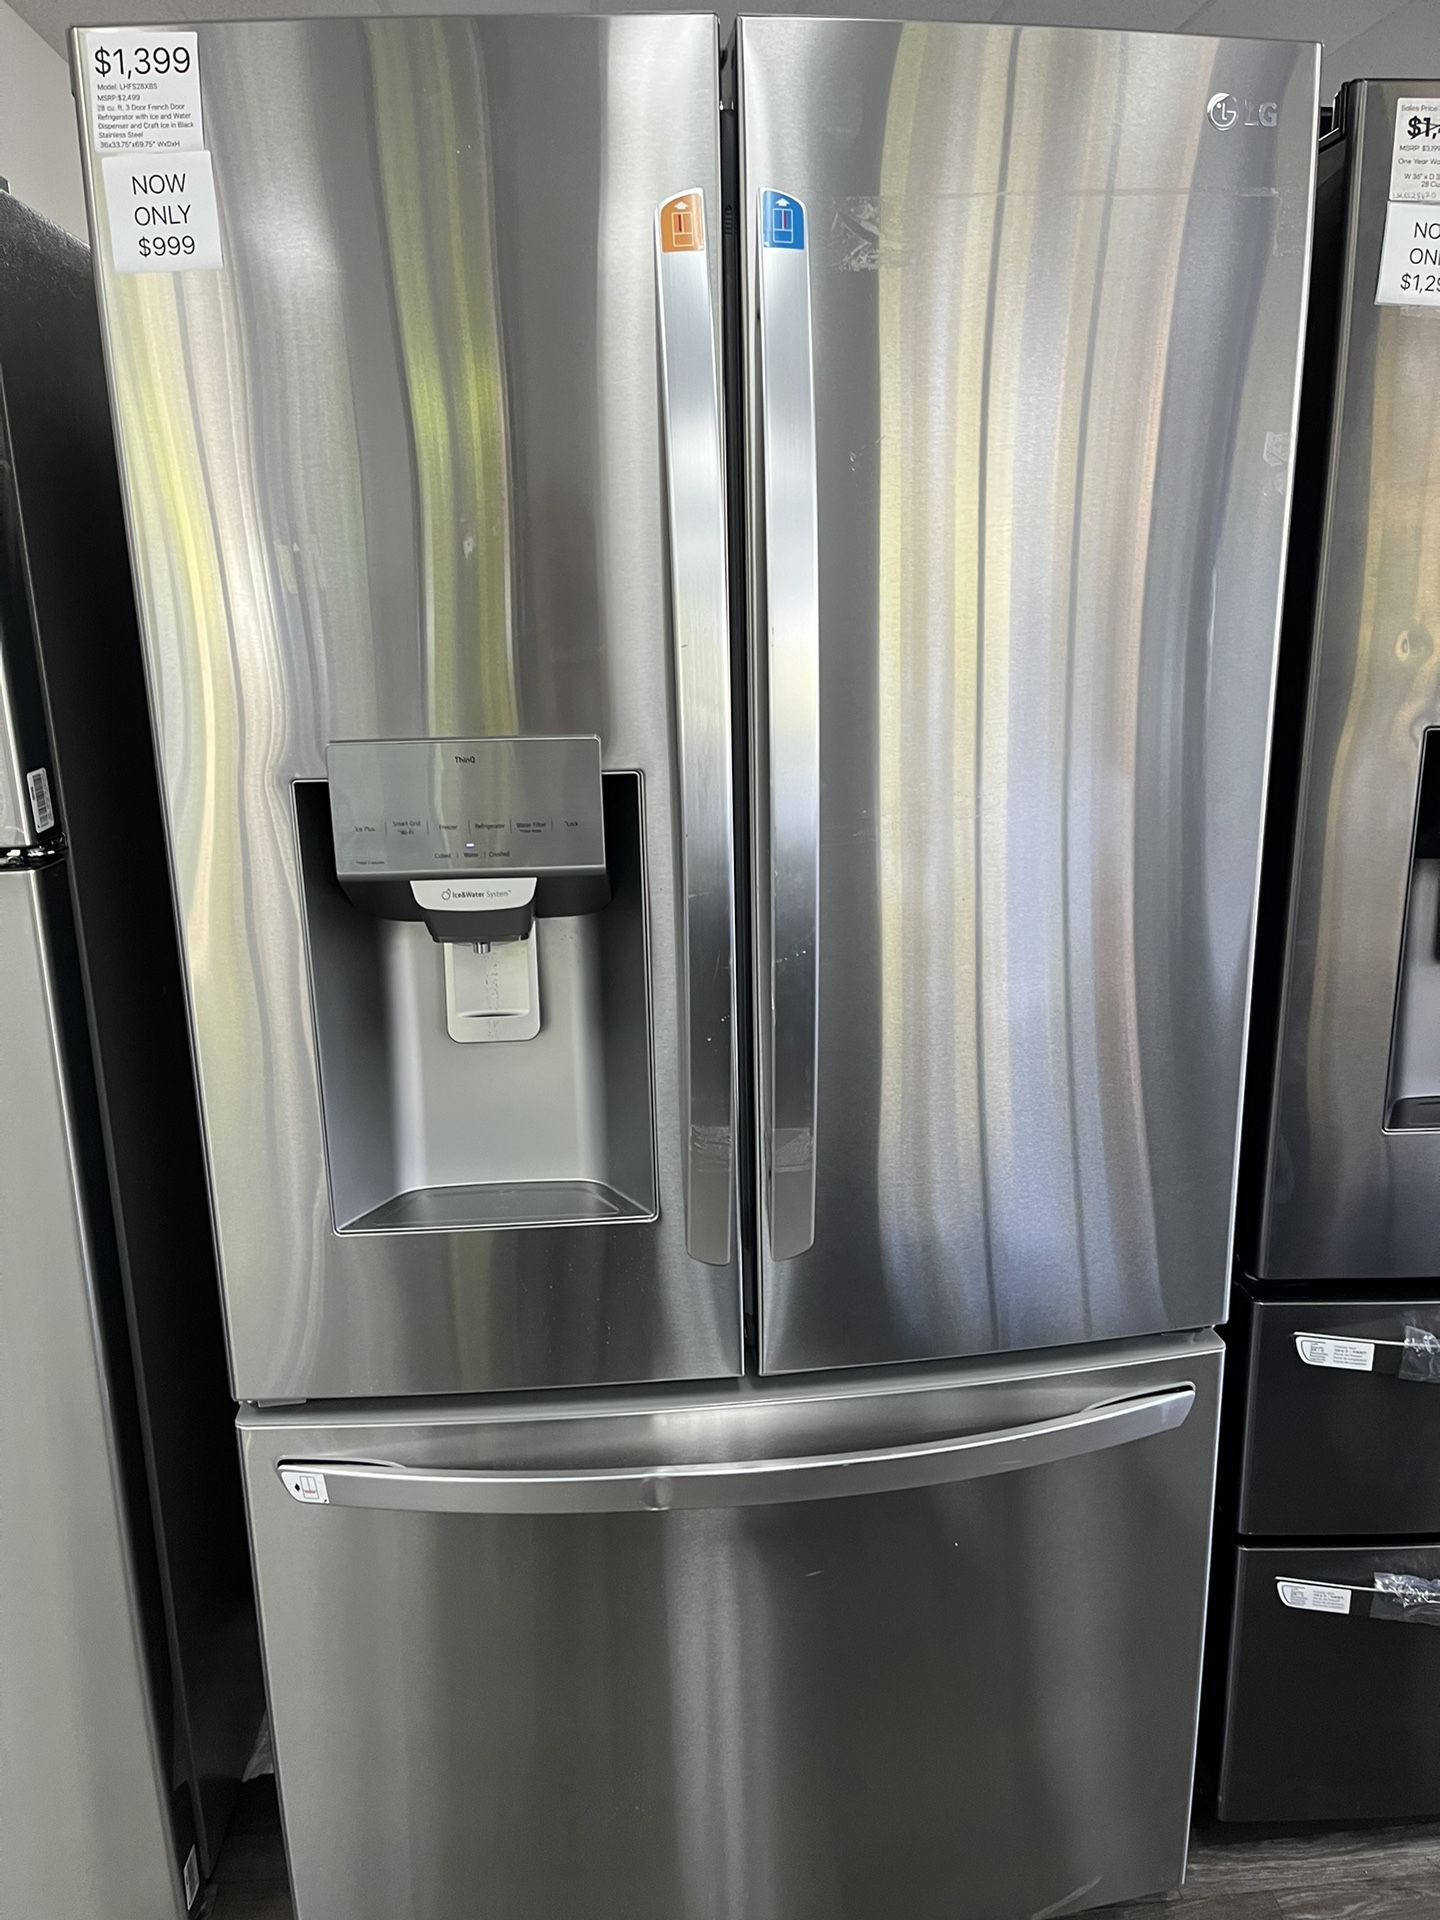 Clearance Sale / NOW$999 Was$2499 Large Capacity French Door Refrigerator With Craft Ice Maker 